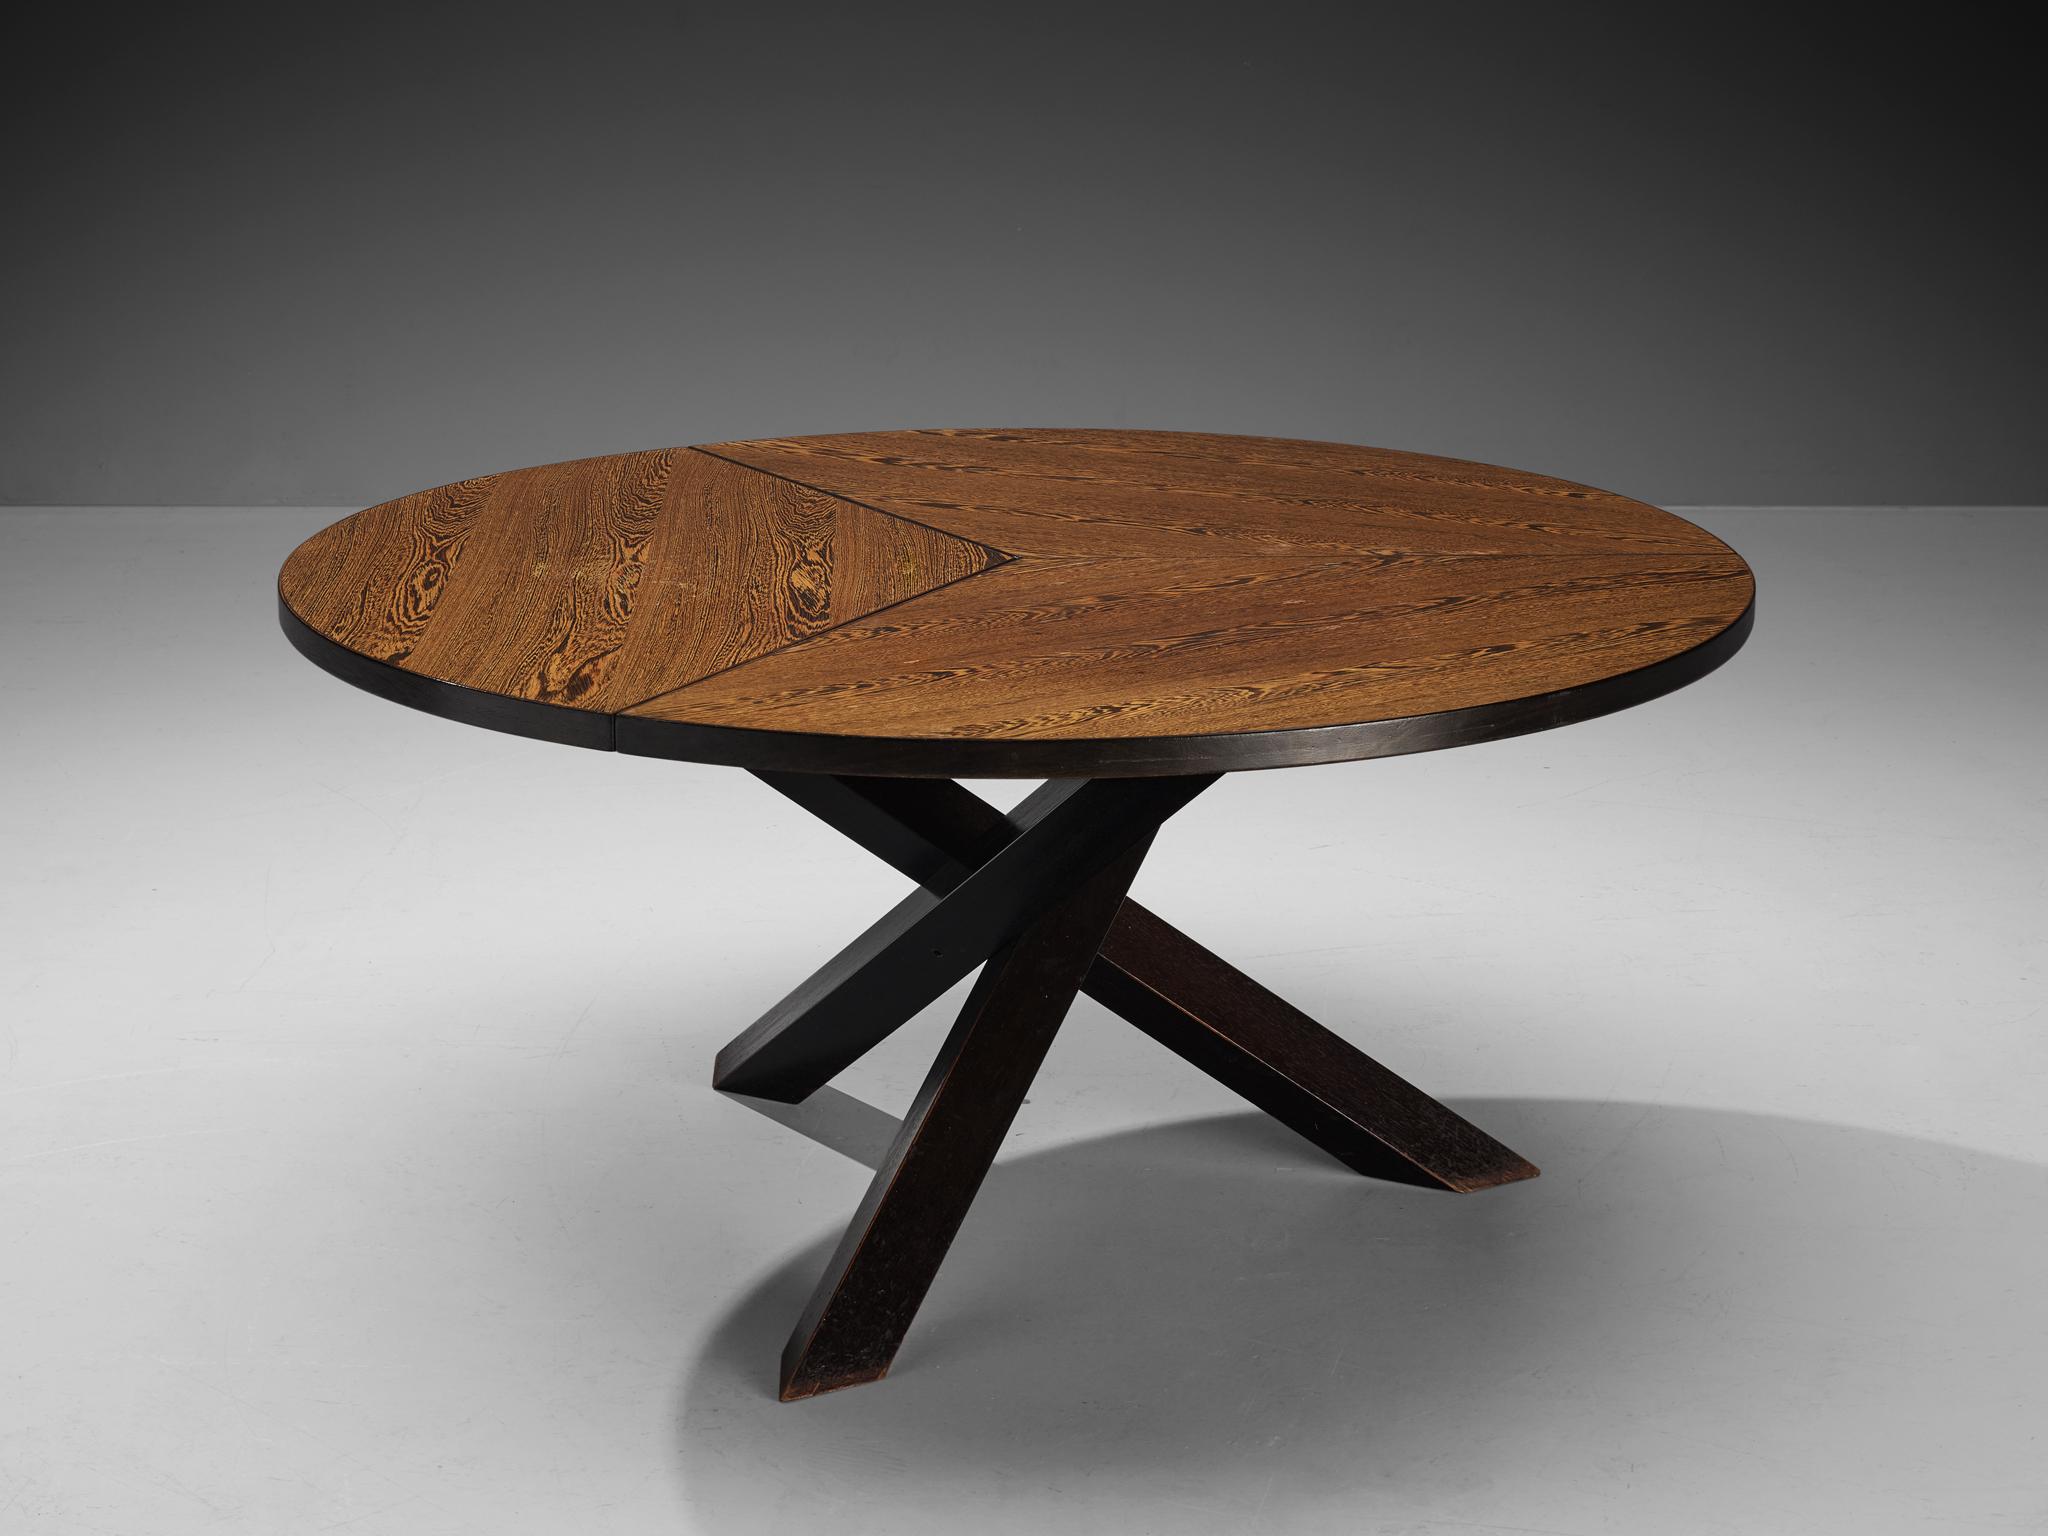 Martin Visser for 't Spectrum, dining table, wengé, stained wood, The Netherlands, 1960s.

Beautiful wengé dining table with round top, divided into three parts. The base consist of three crossed legs of solid, darkened wood. The veneer top shows an